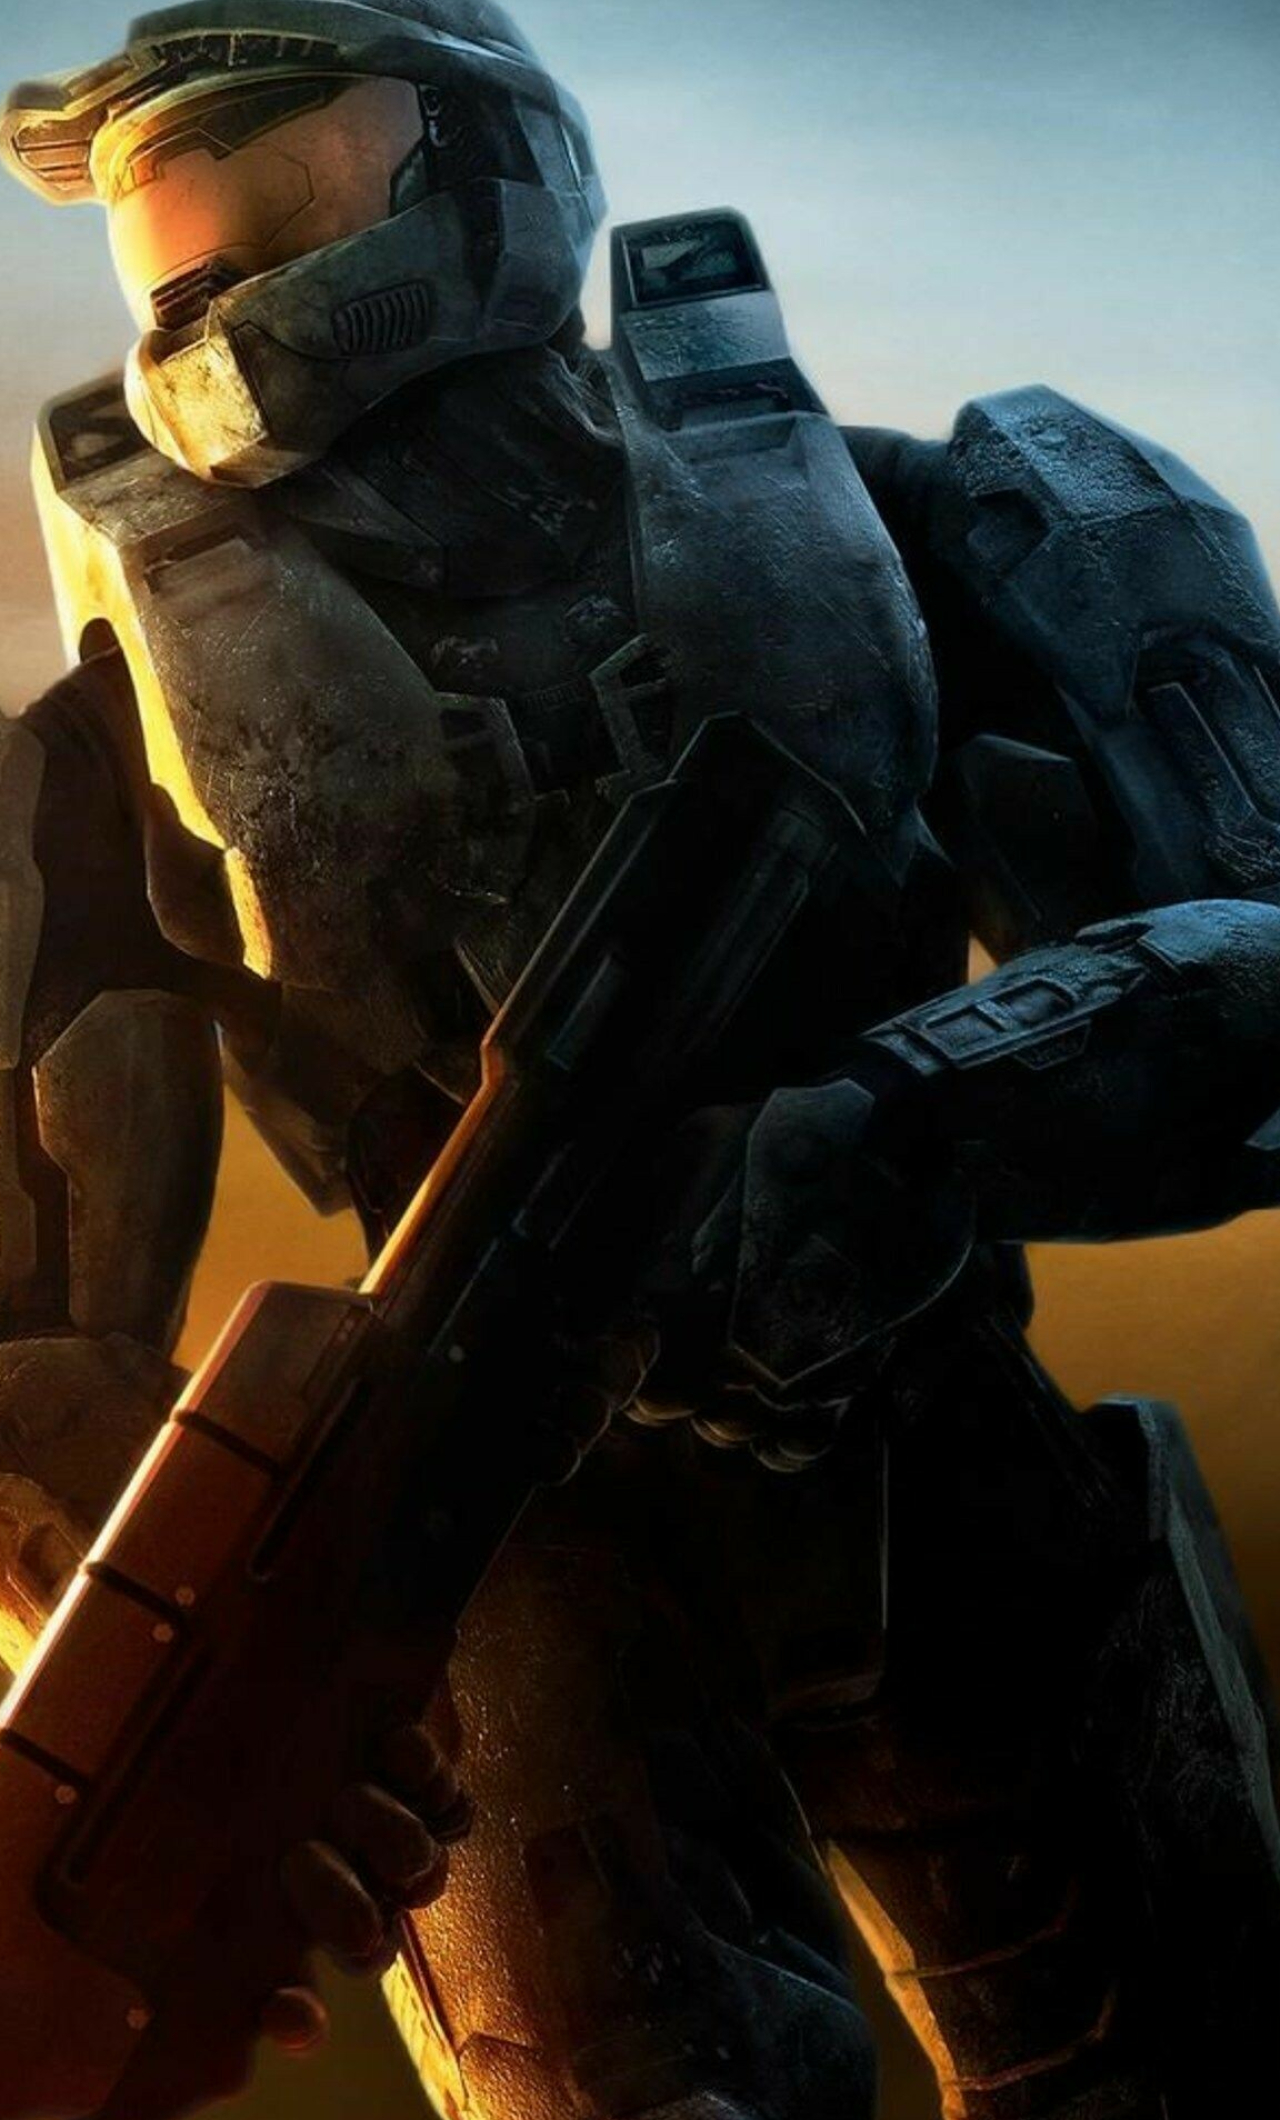 Halo: The militaristic science fiction story, Video game. 1280x2120 HD Background.